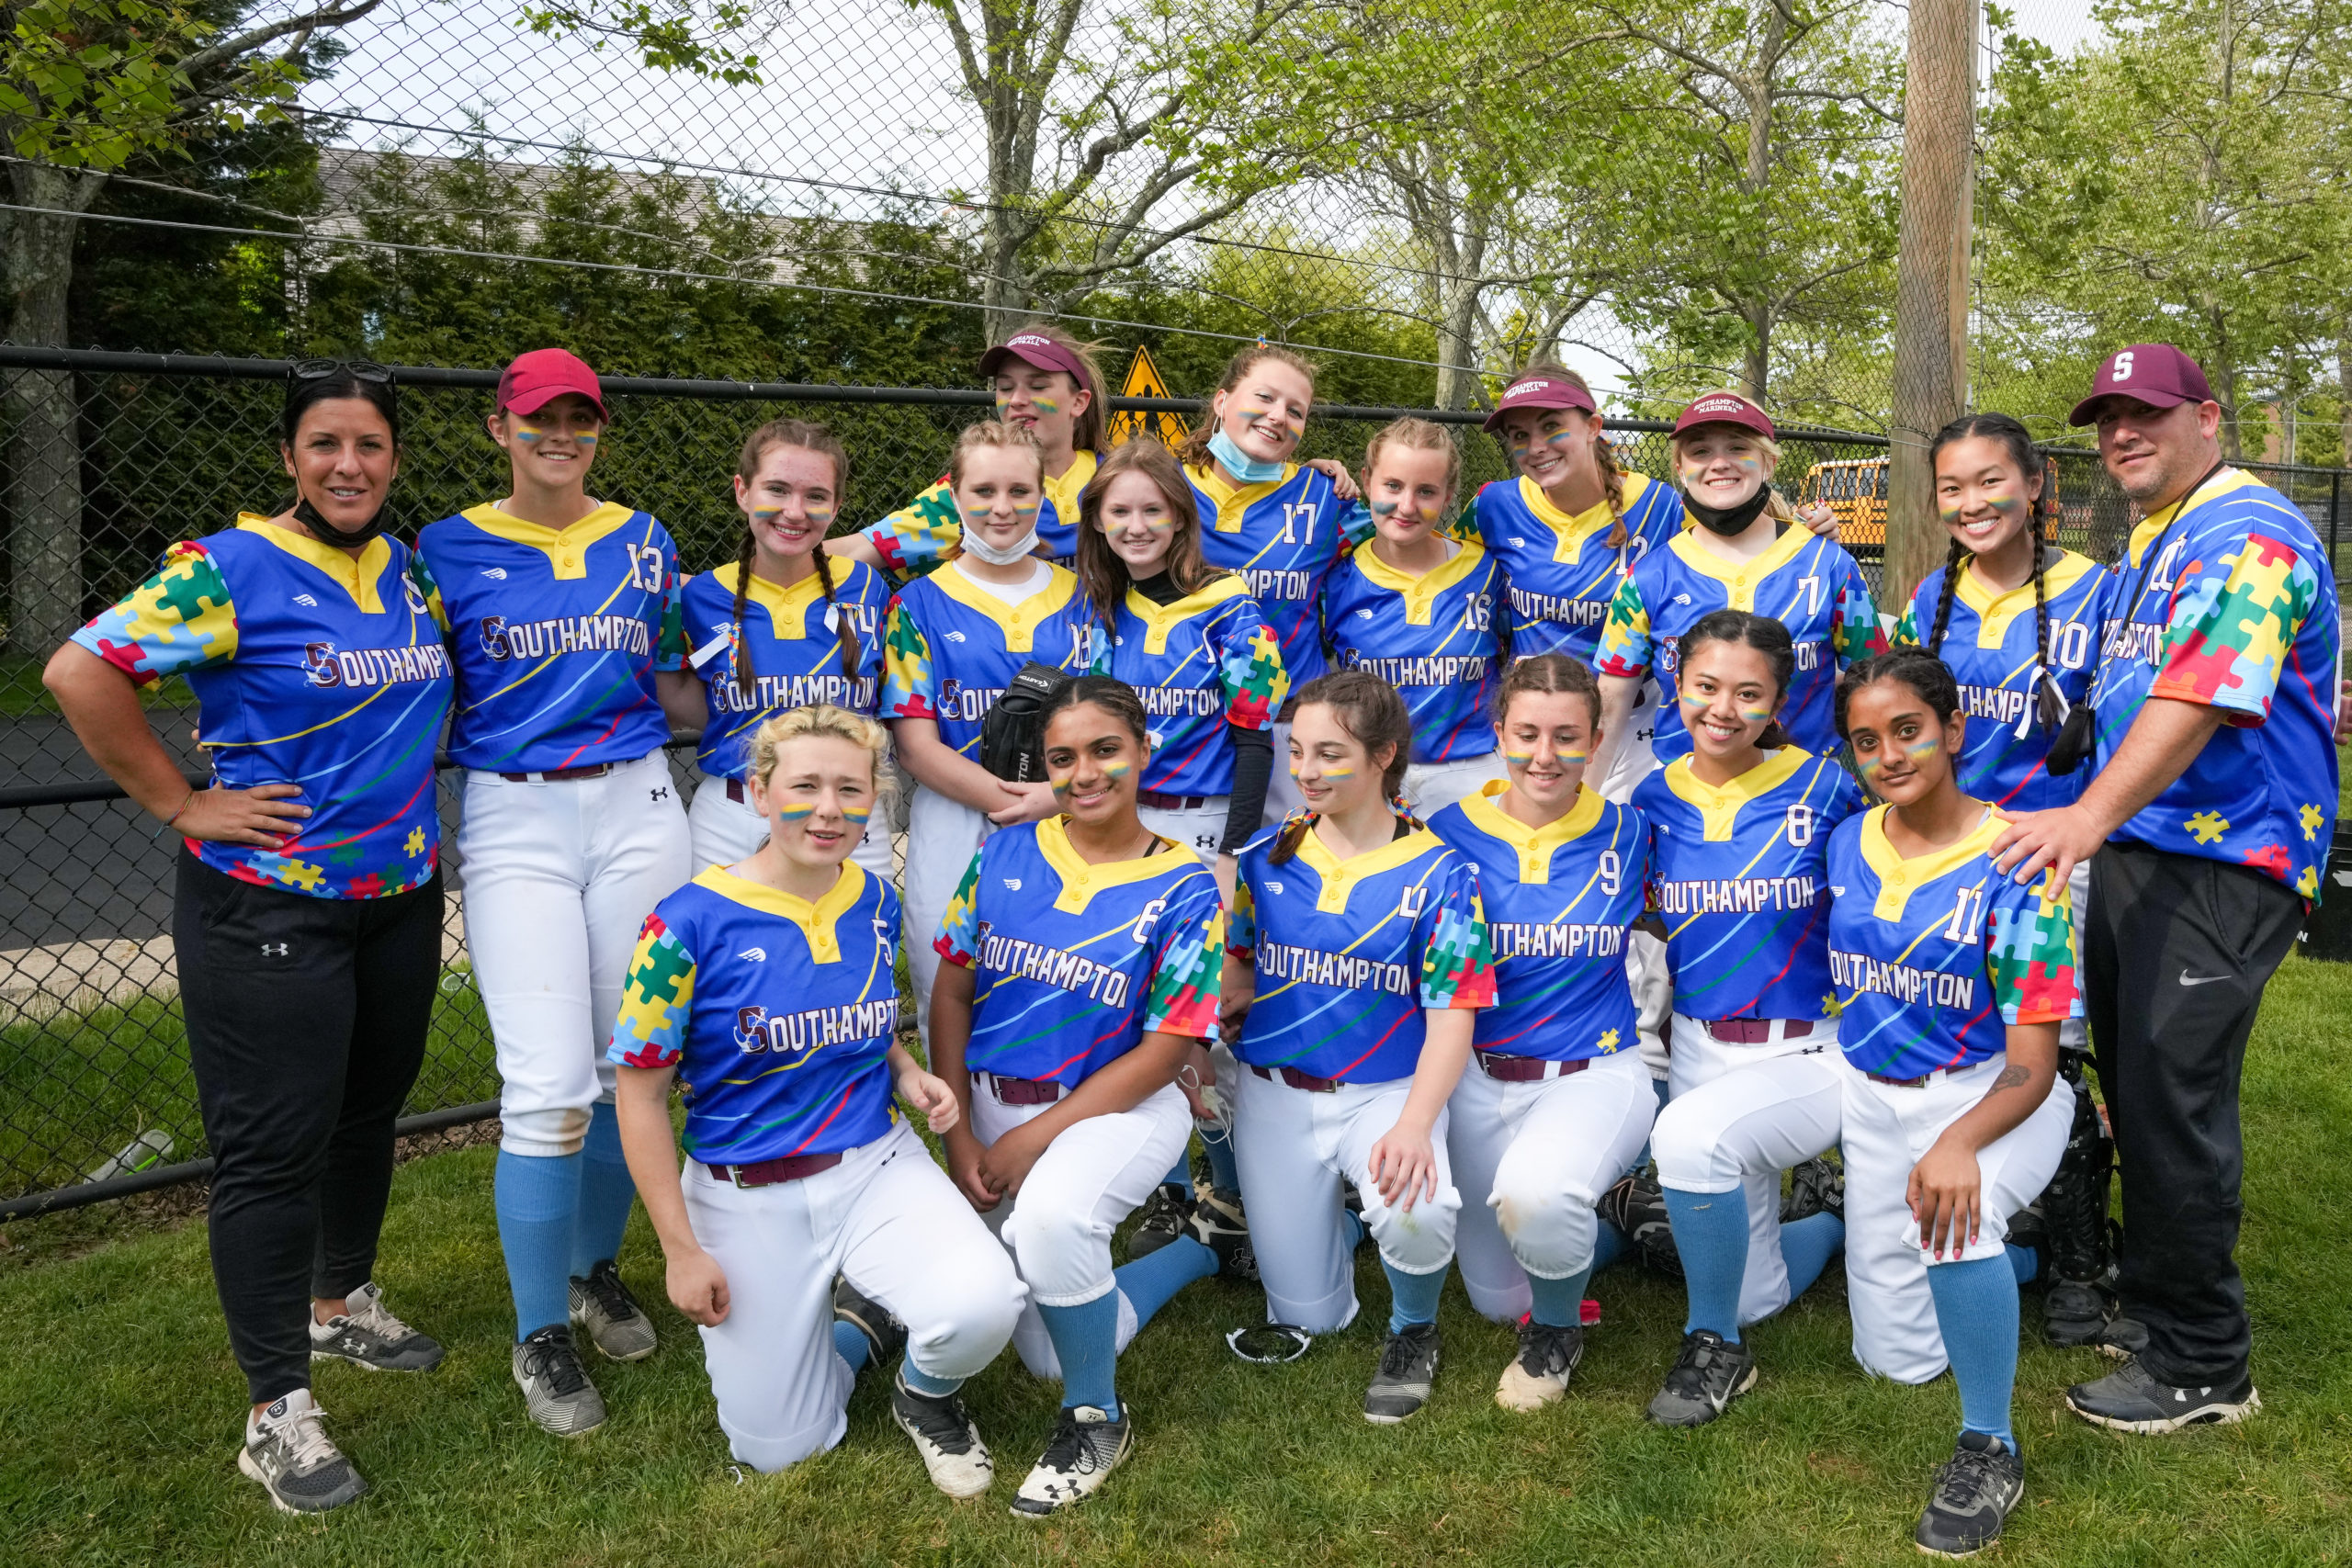 The Southampton softball team prior to its game against Southold/Greenport on Friday.  RON ESPOSITO